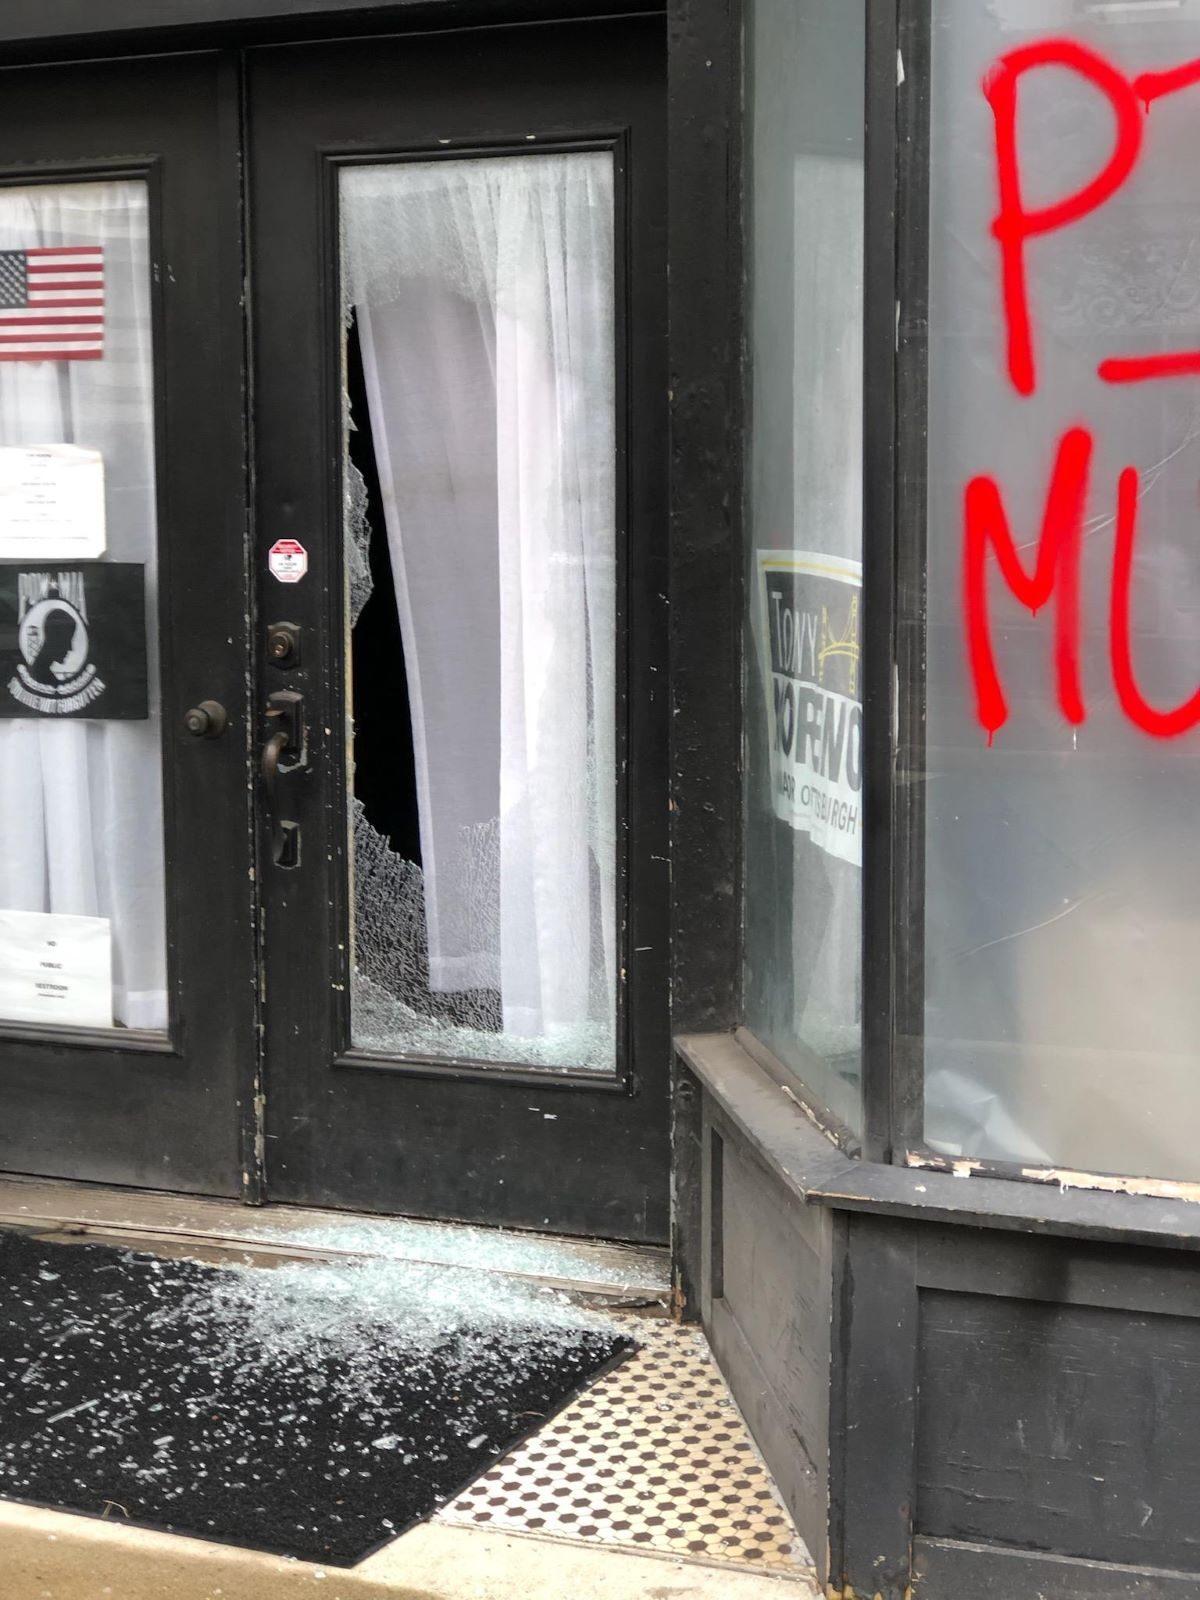 Pittsburgh Mayoral Candidate Tony Moreno’s campaign headquarters was vandalized in Pittsburgh, Pa., on Oct. 22, 2021. (Photo Courtesy of Patty Poloka, Moreno campaign manager )